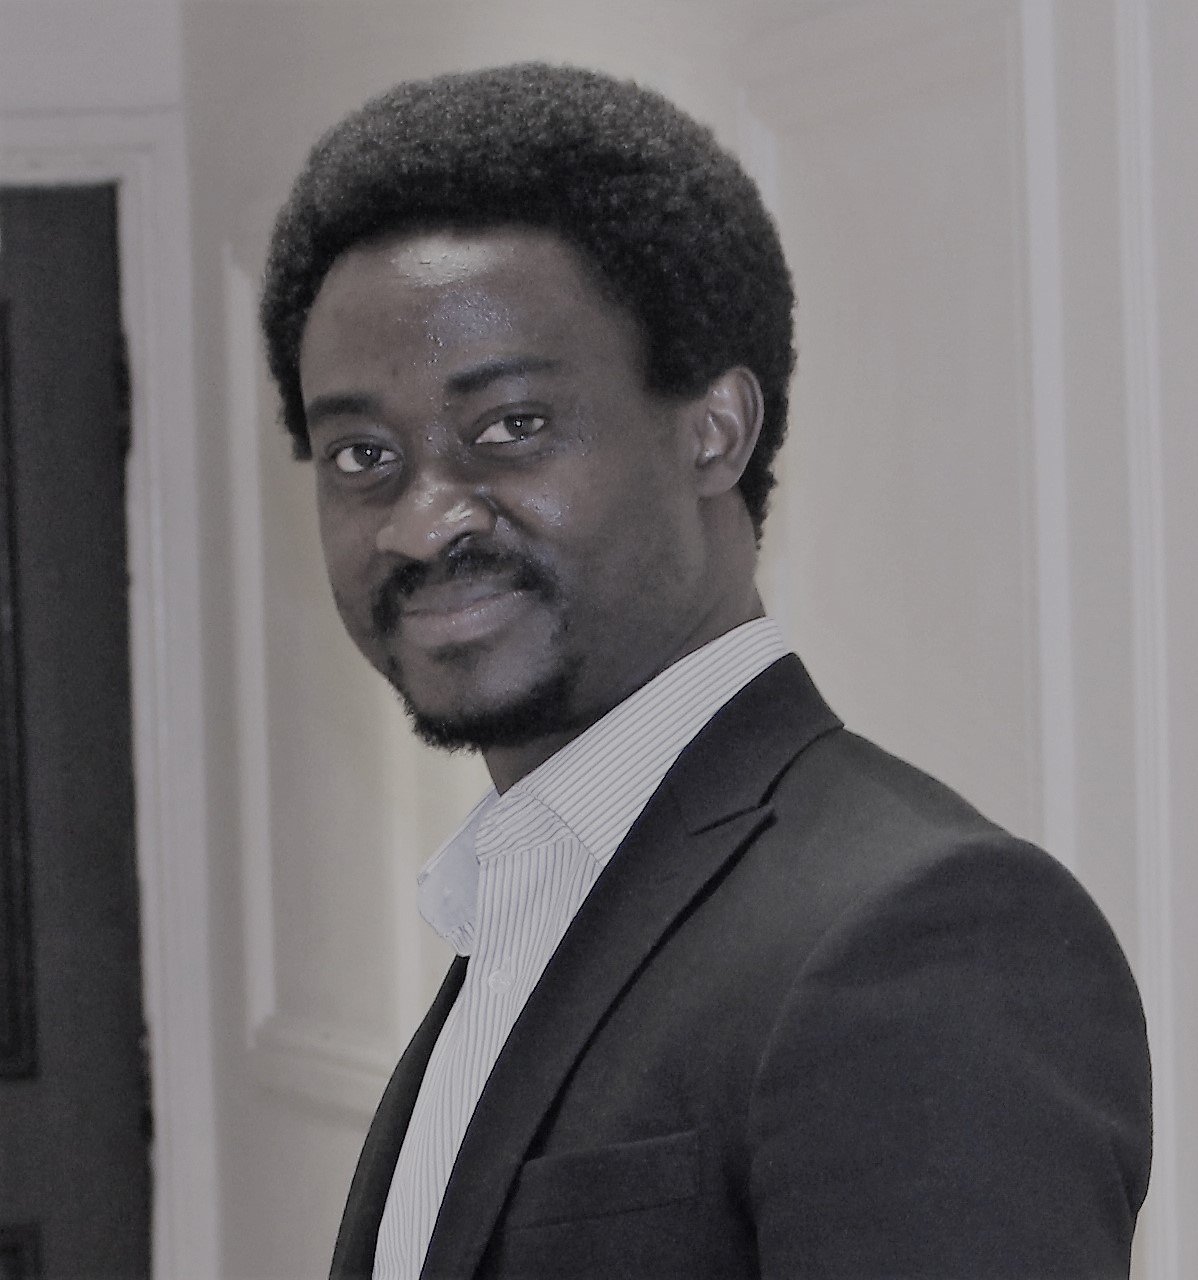 Picture of Onaopepo Adeniyi smiling at camera